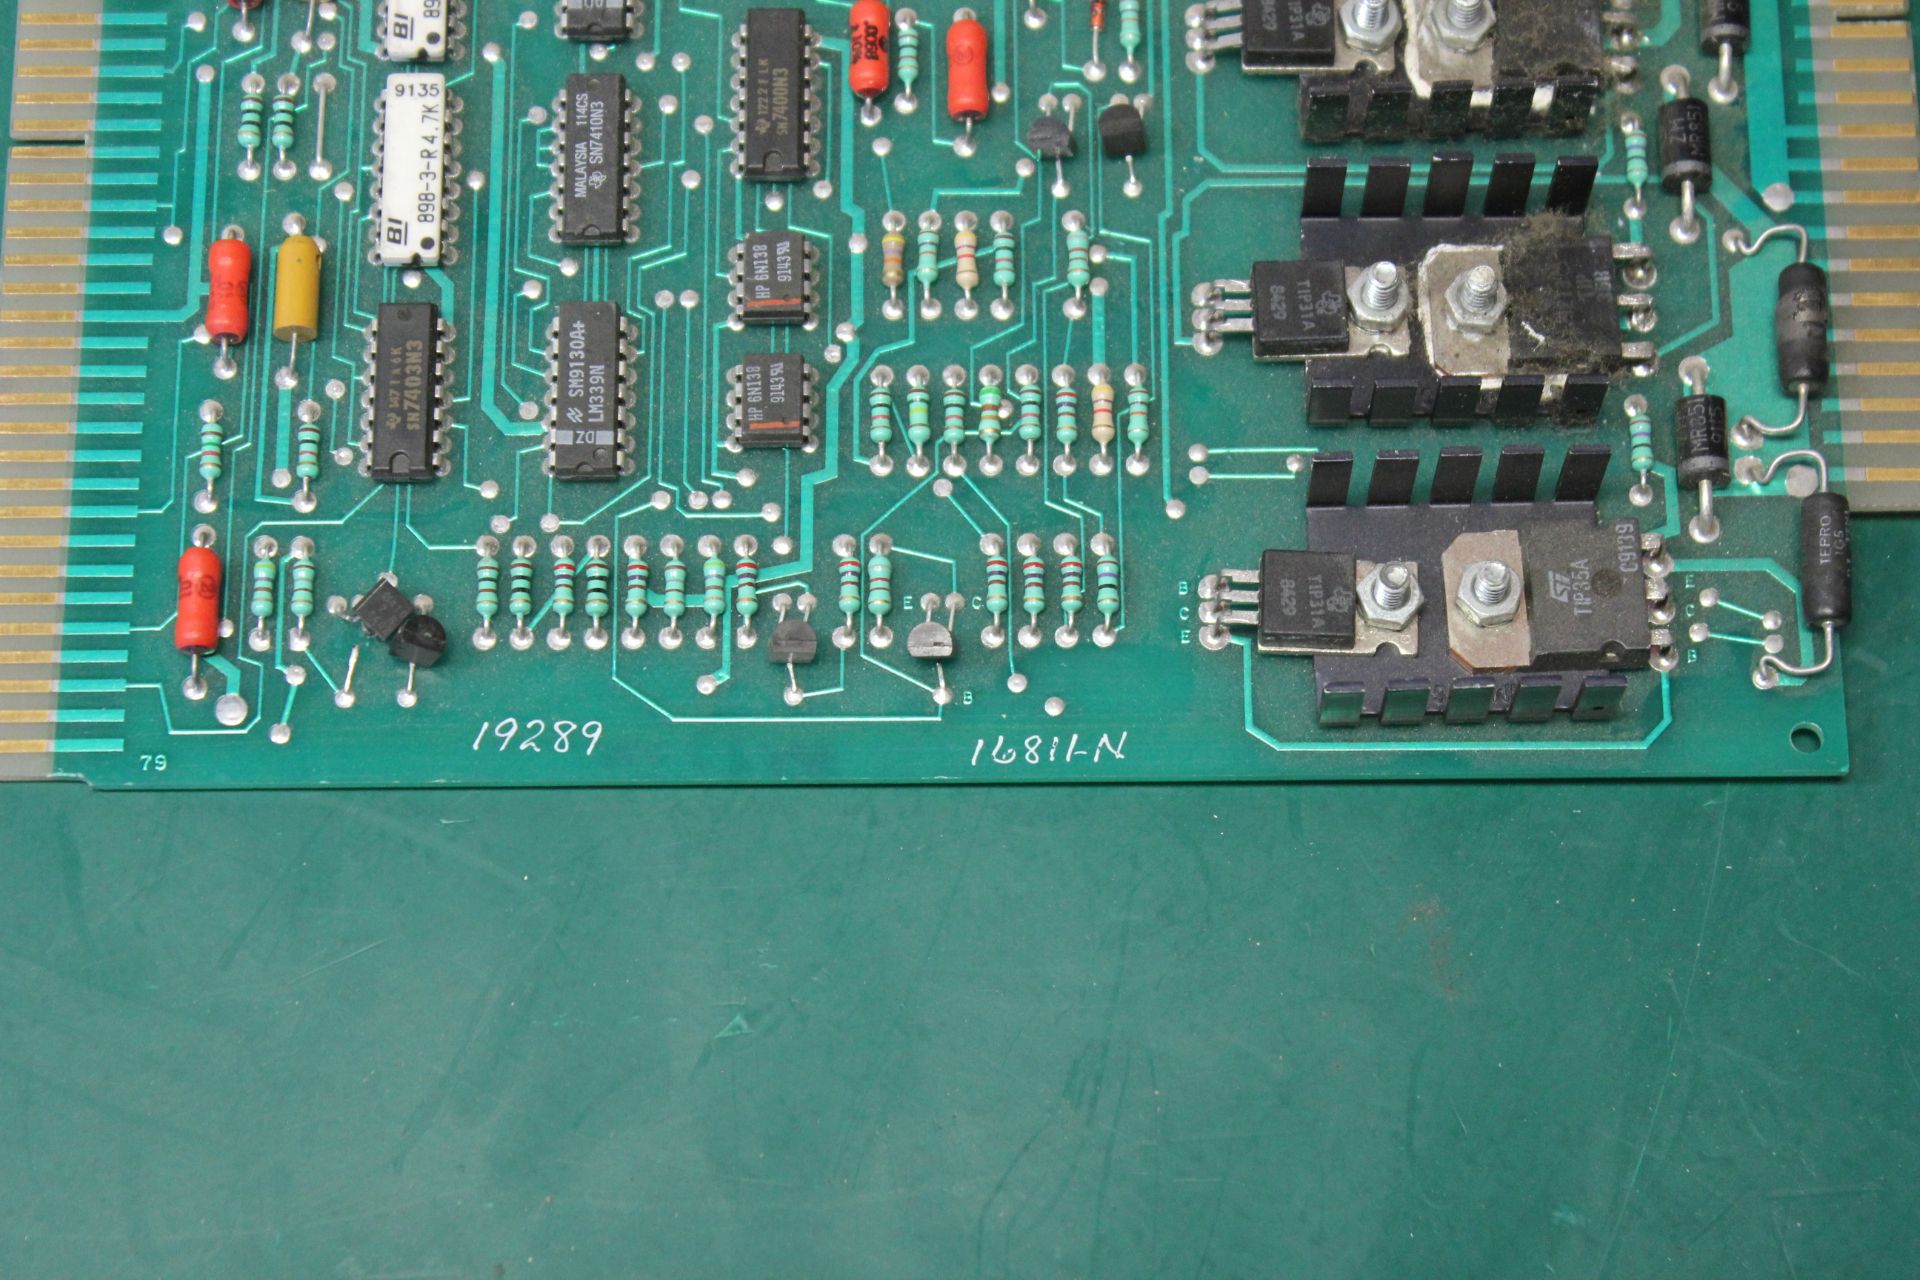 UNIVERSAL INSTRUMENTS CPU BOARD 19289 16811-N - Image 4 of 4